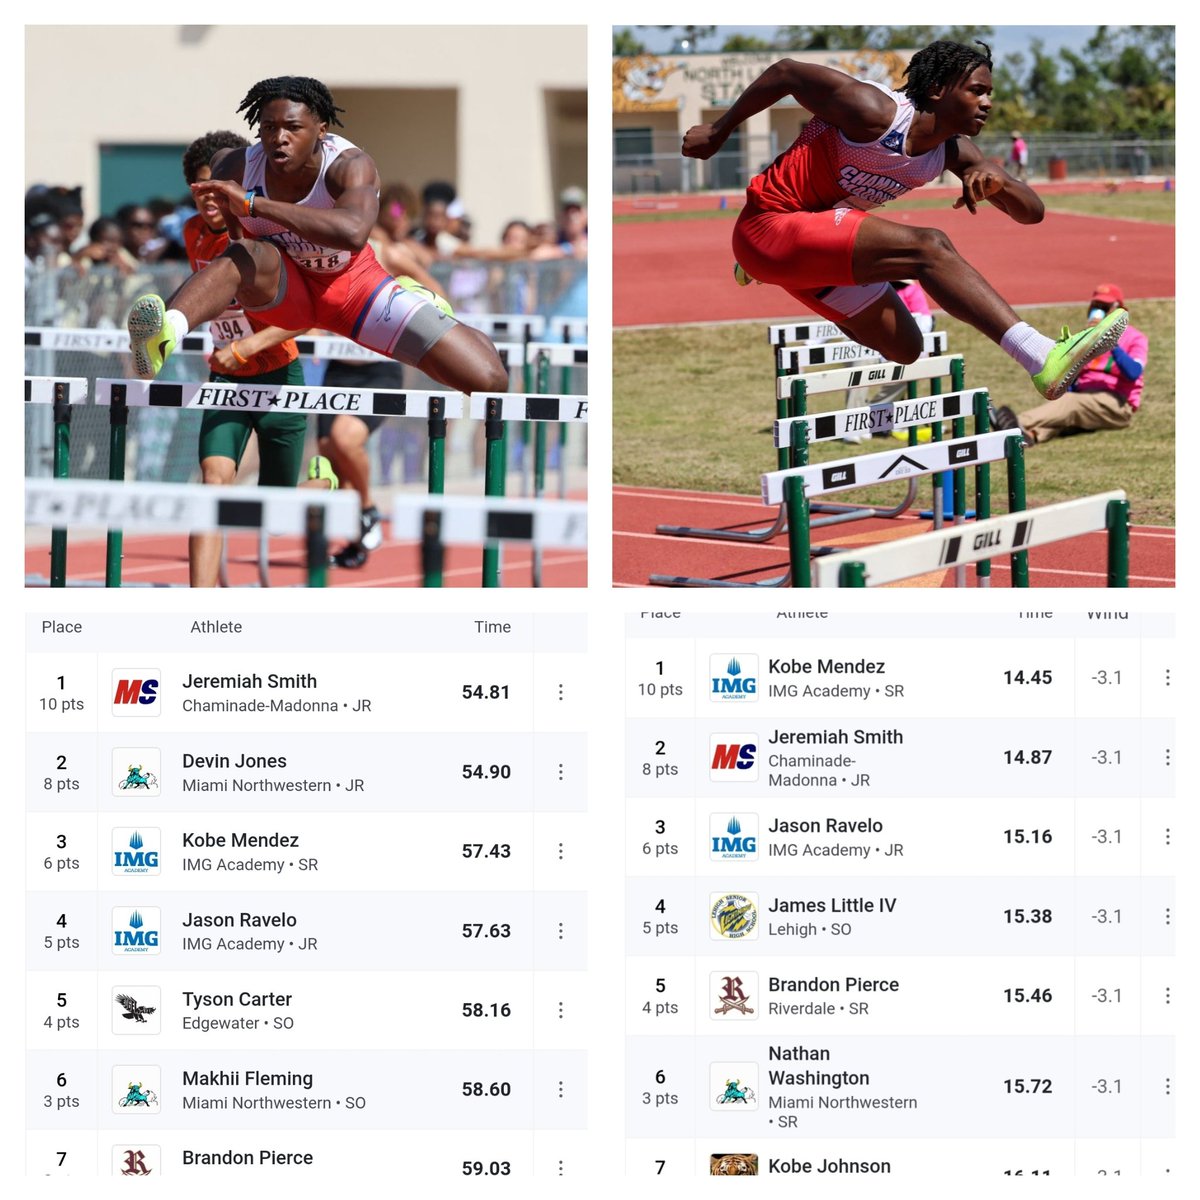 Congrats to class of 2024 @Jermiah_Smith1 for 1st place in the #400m Hurdles at the Guy Thomas Memorial Classic at Dunbar High in a time of 54.81pr (FL#8, US#10) and 2nd place finish in the 110m Hurdles in 14.87. @flmilesplit @milesplit @Coach_DSutton @cmlions @CMLions_Sports